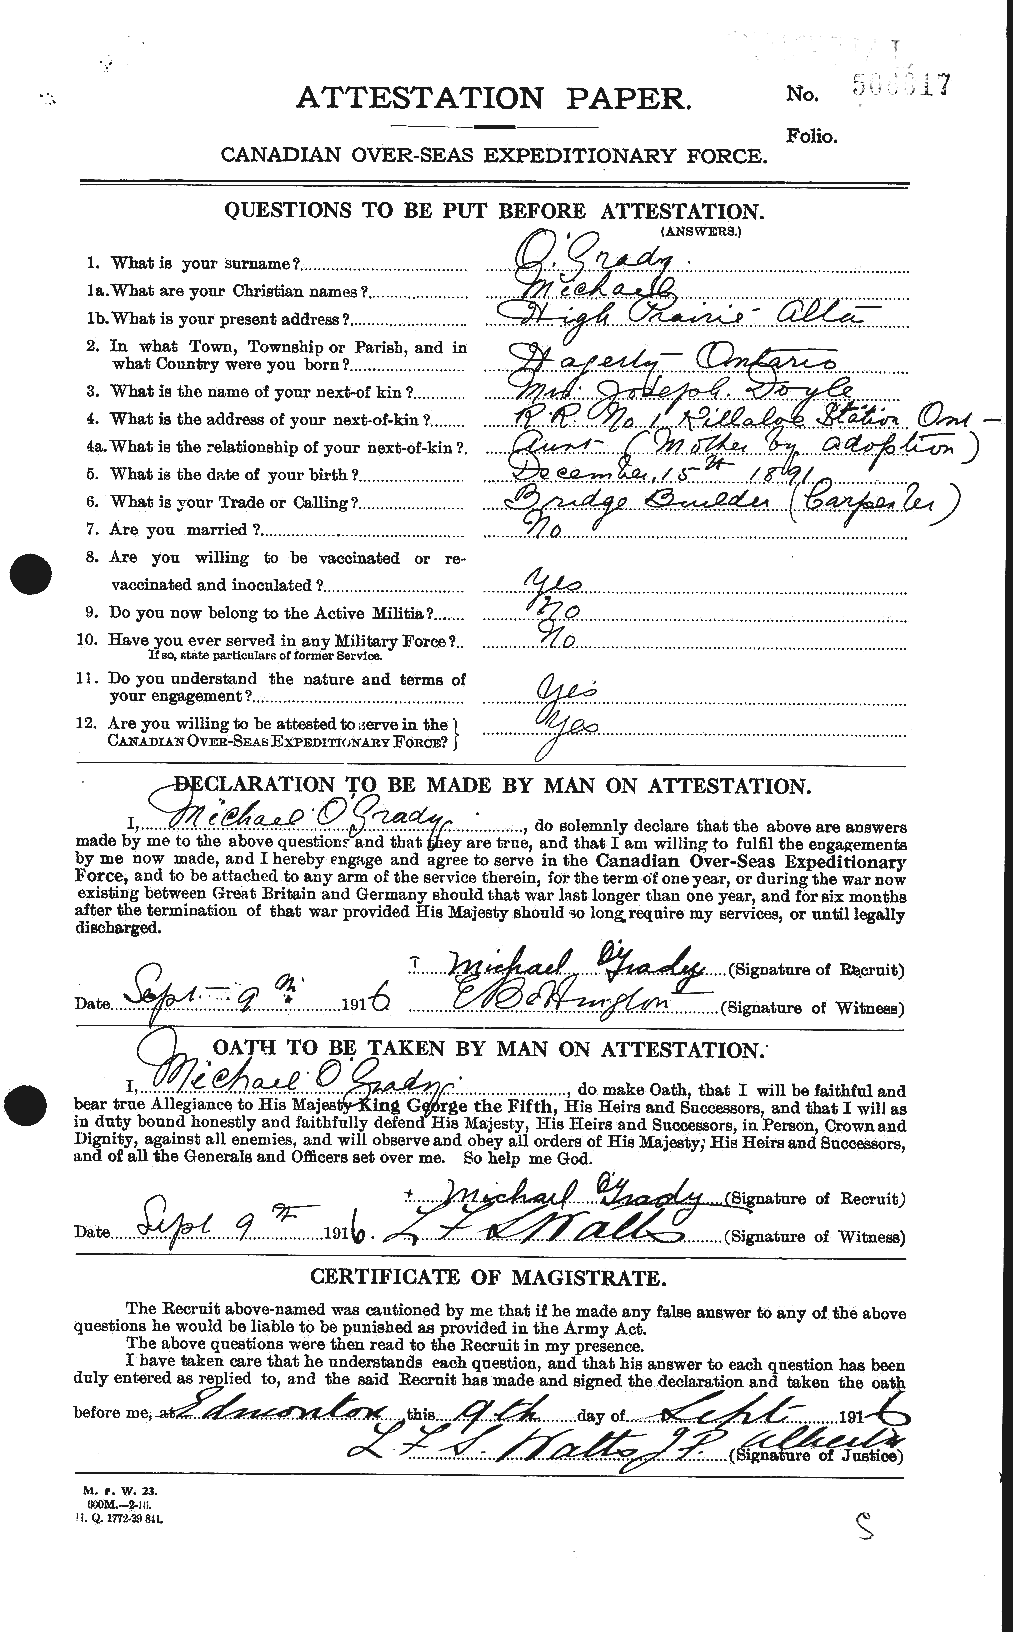 Personnel Records of the First World War - CEF 551375a